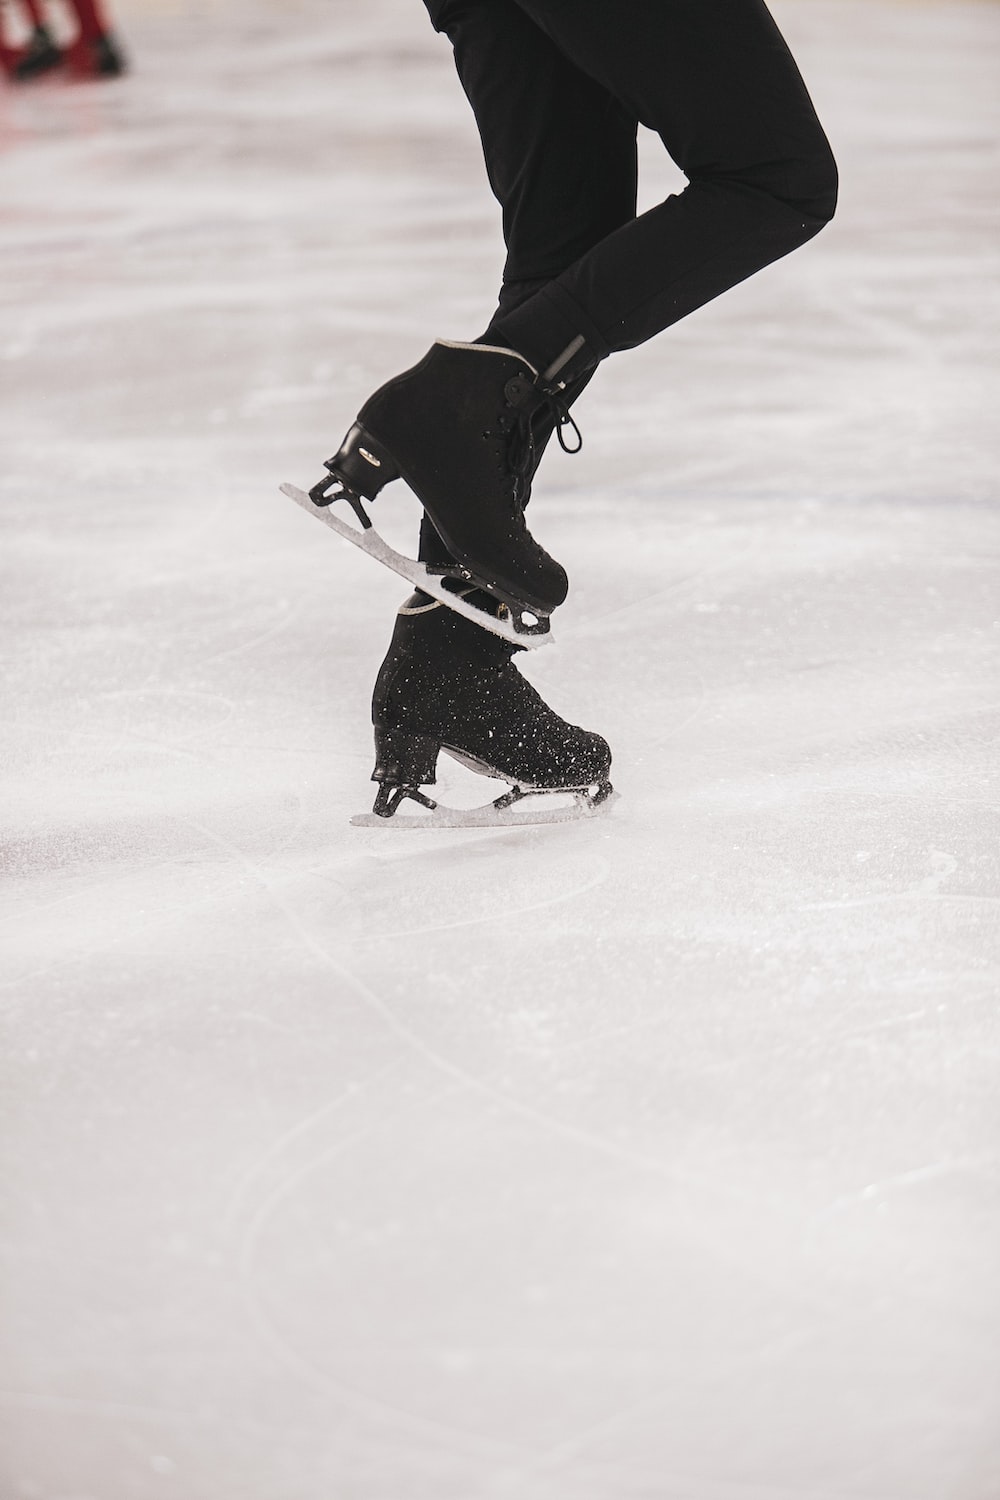 Ice skating pictures download free images on